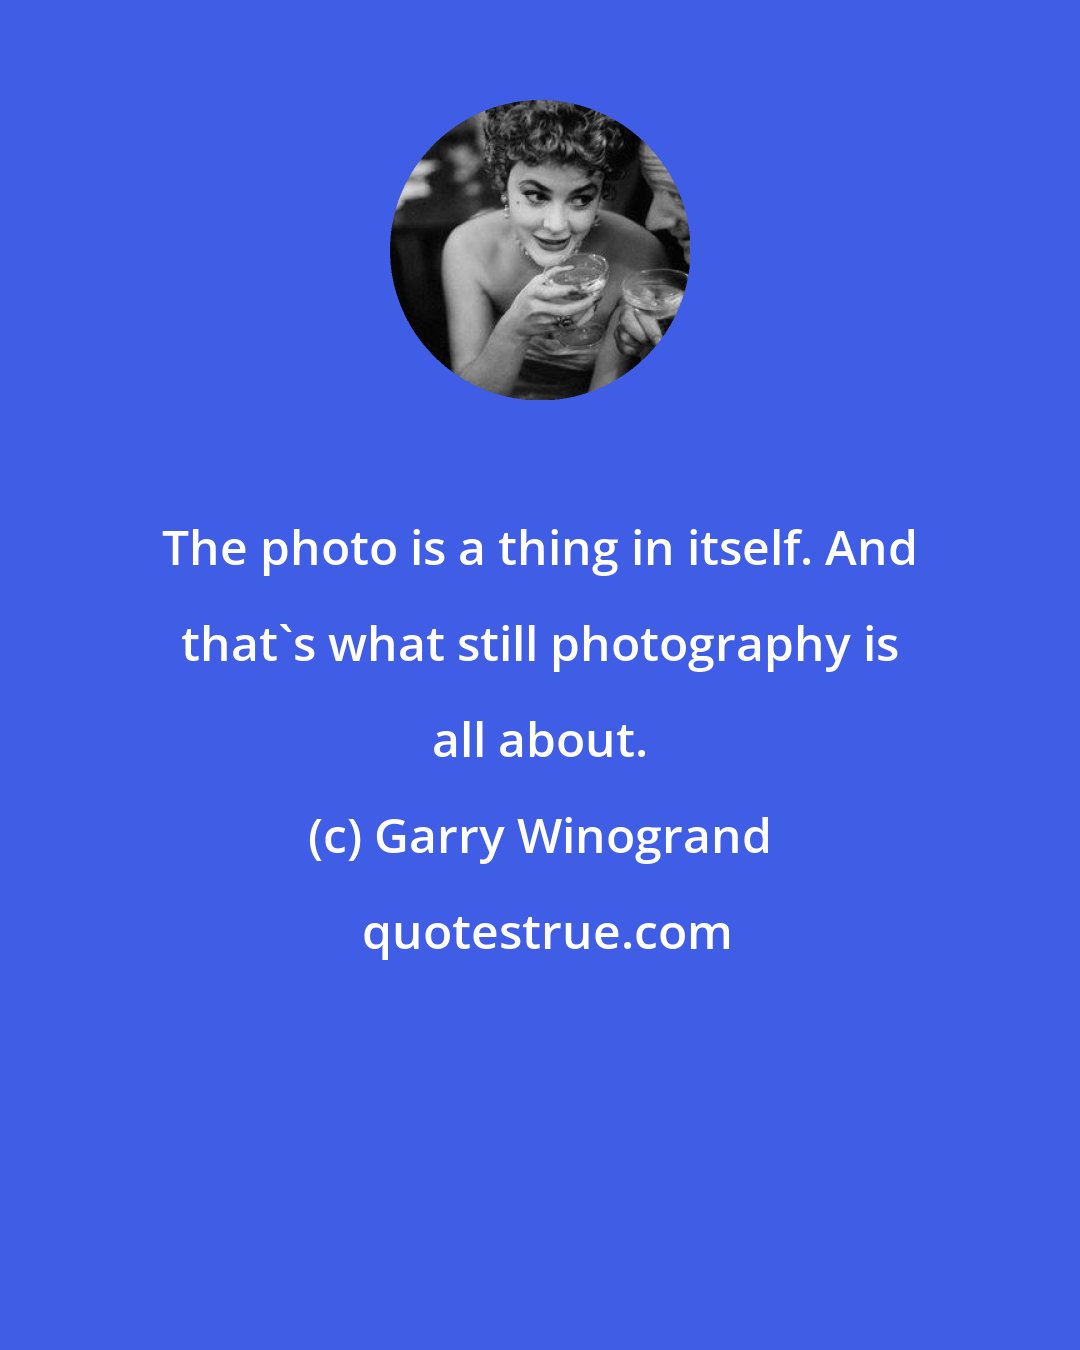 Garry Winogrand: The photo is a thing in itself. And that's what still photography is all about.